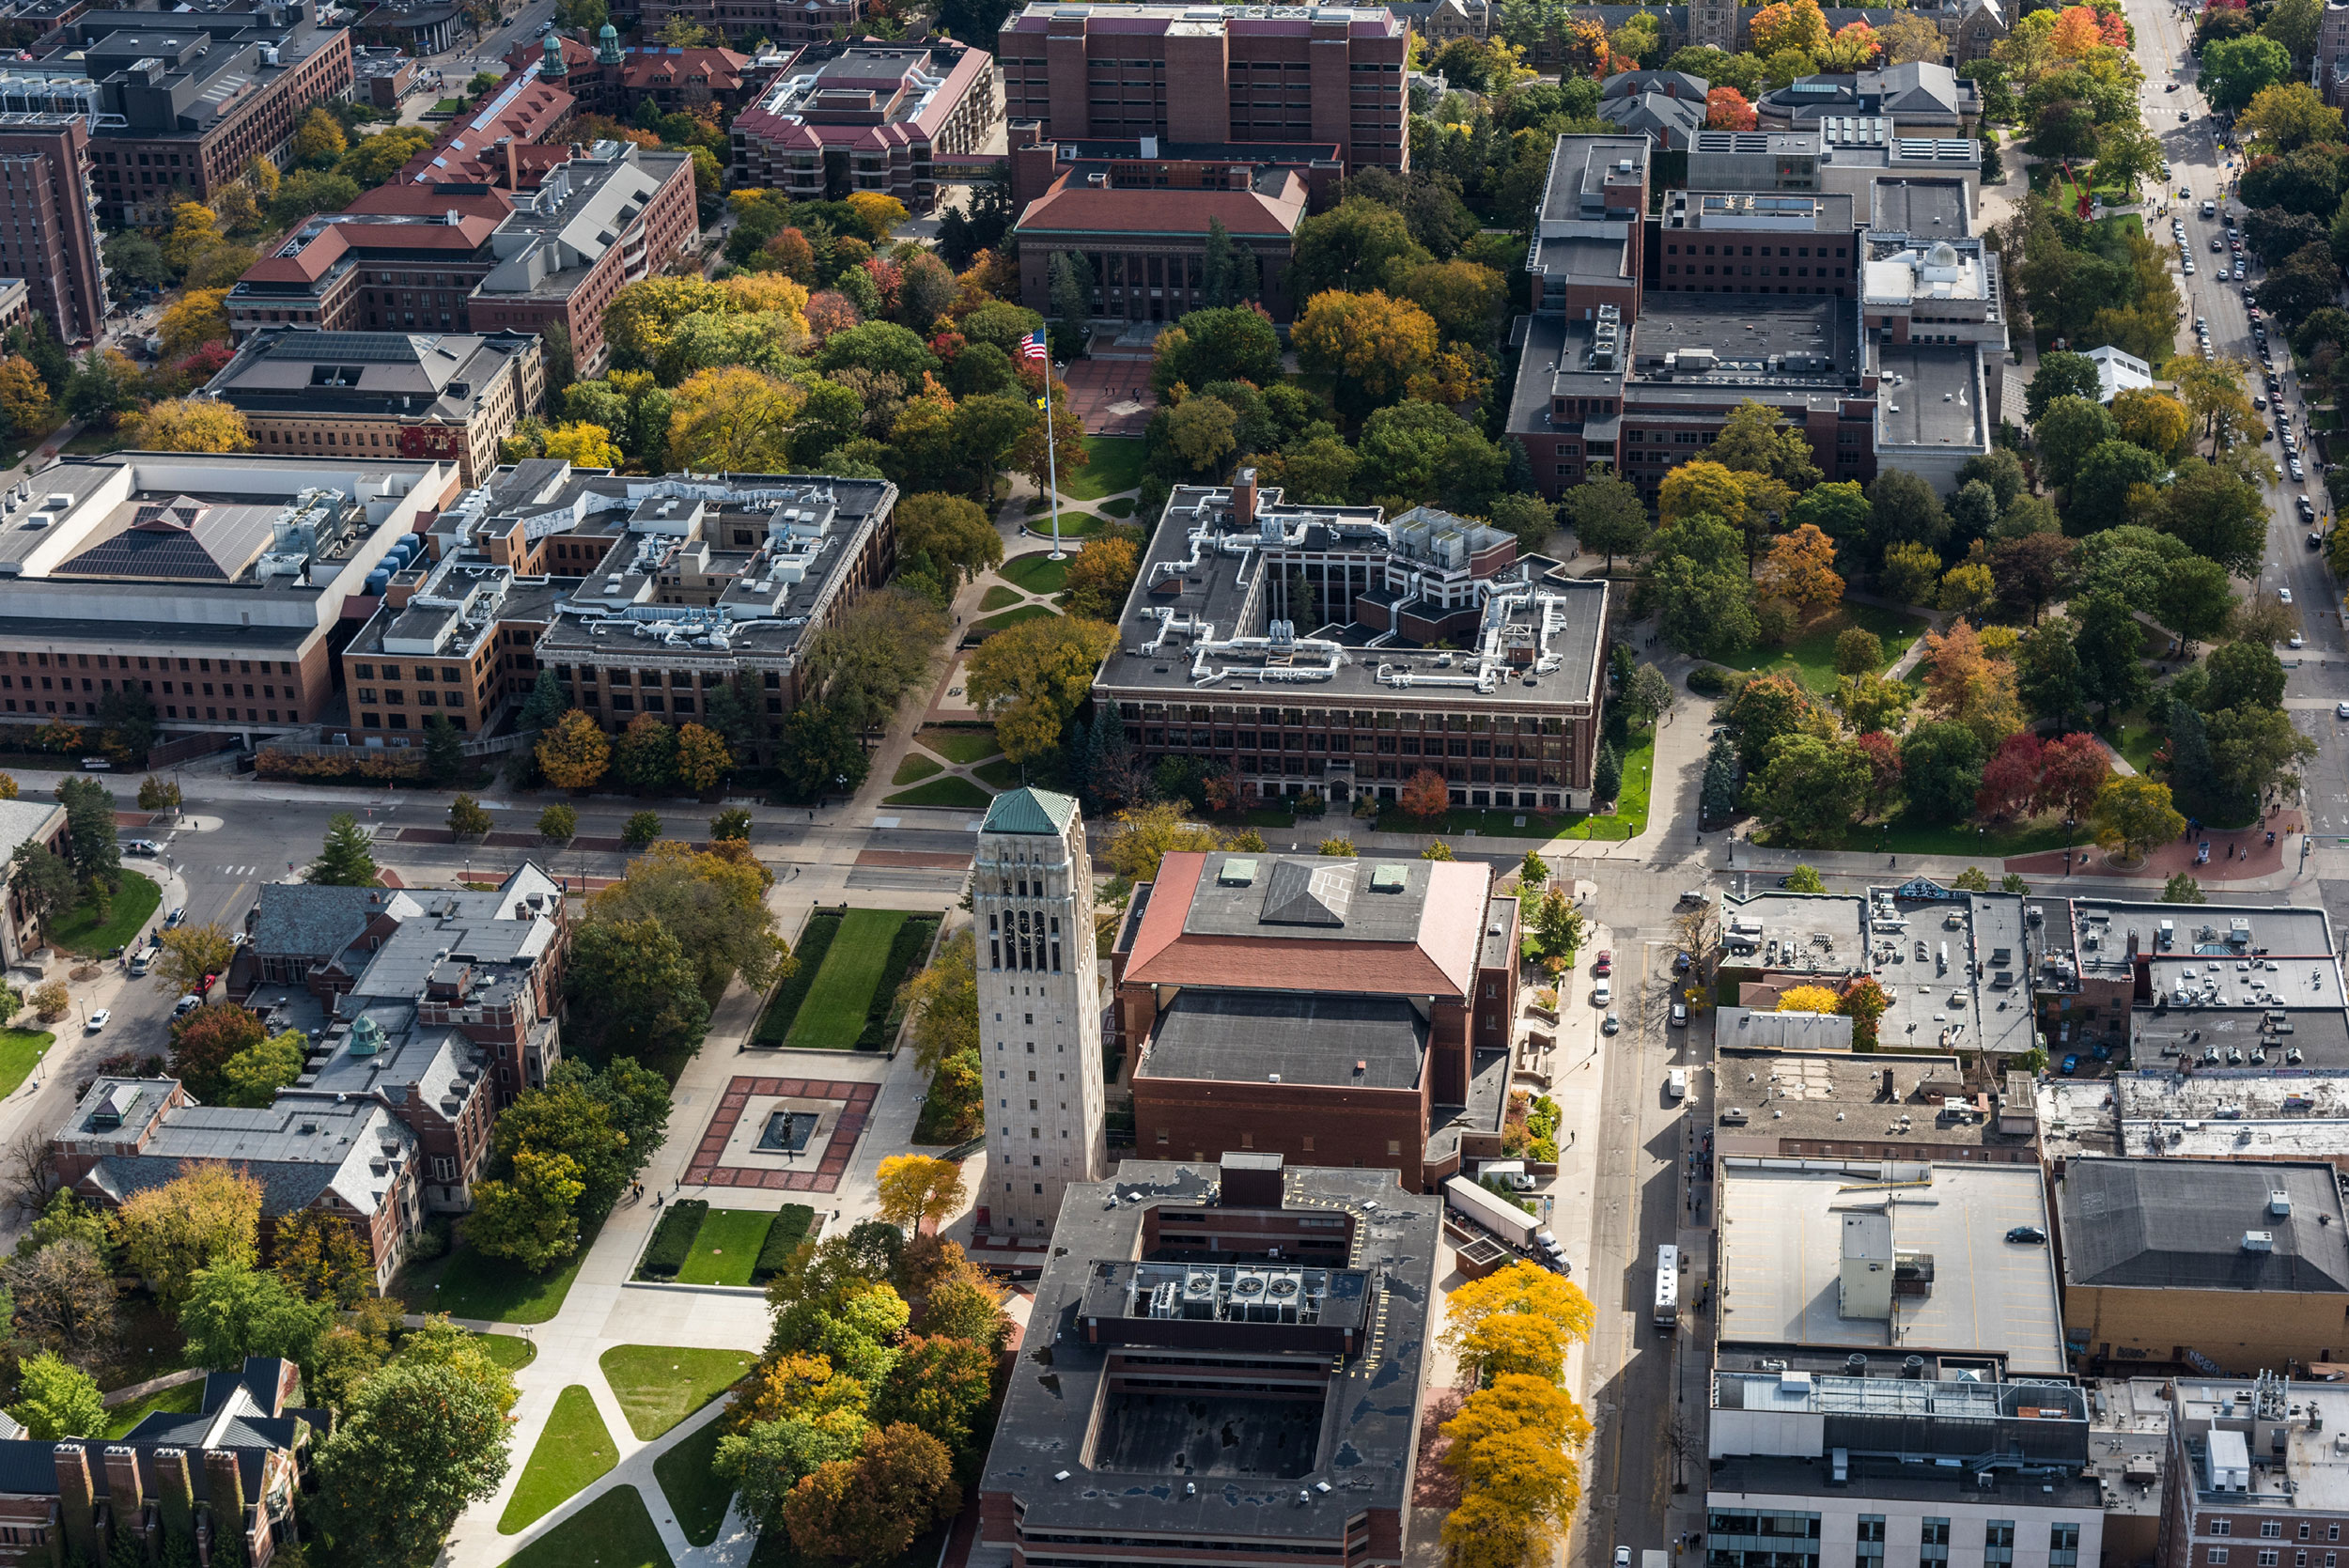 Aerial image of central campus